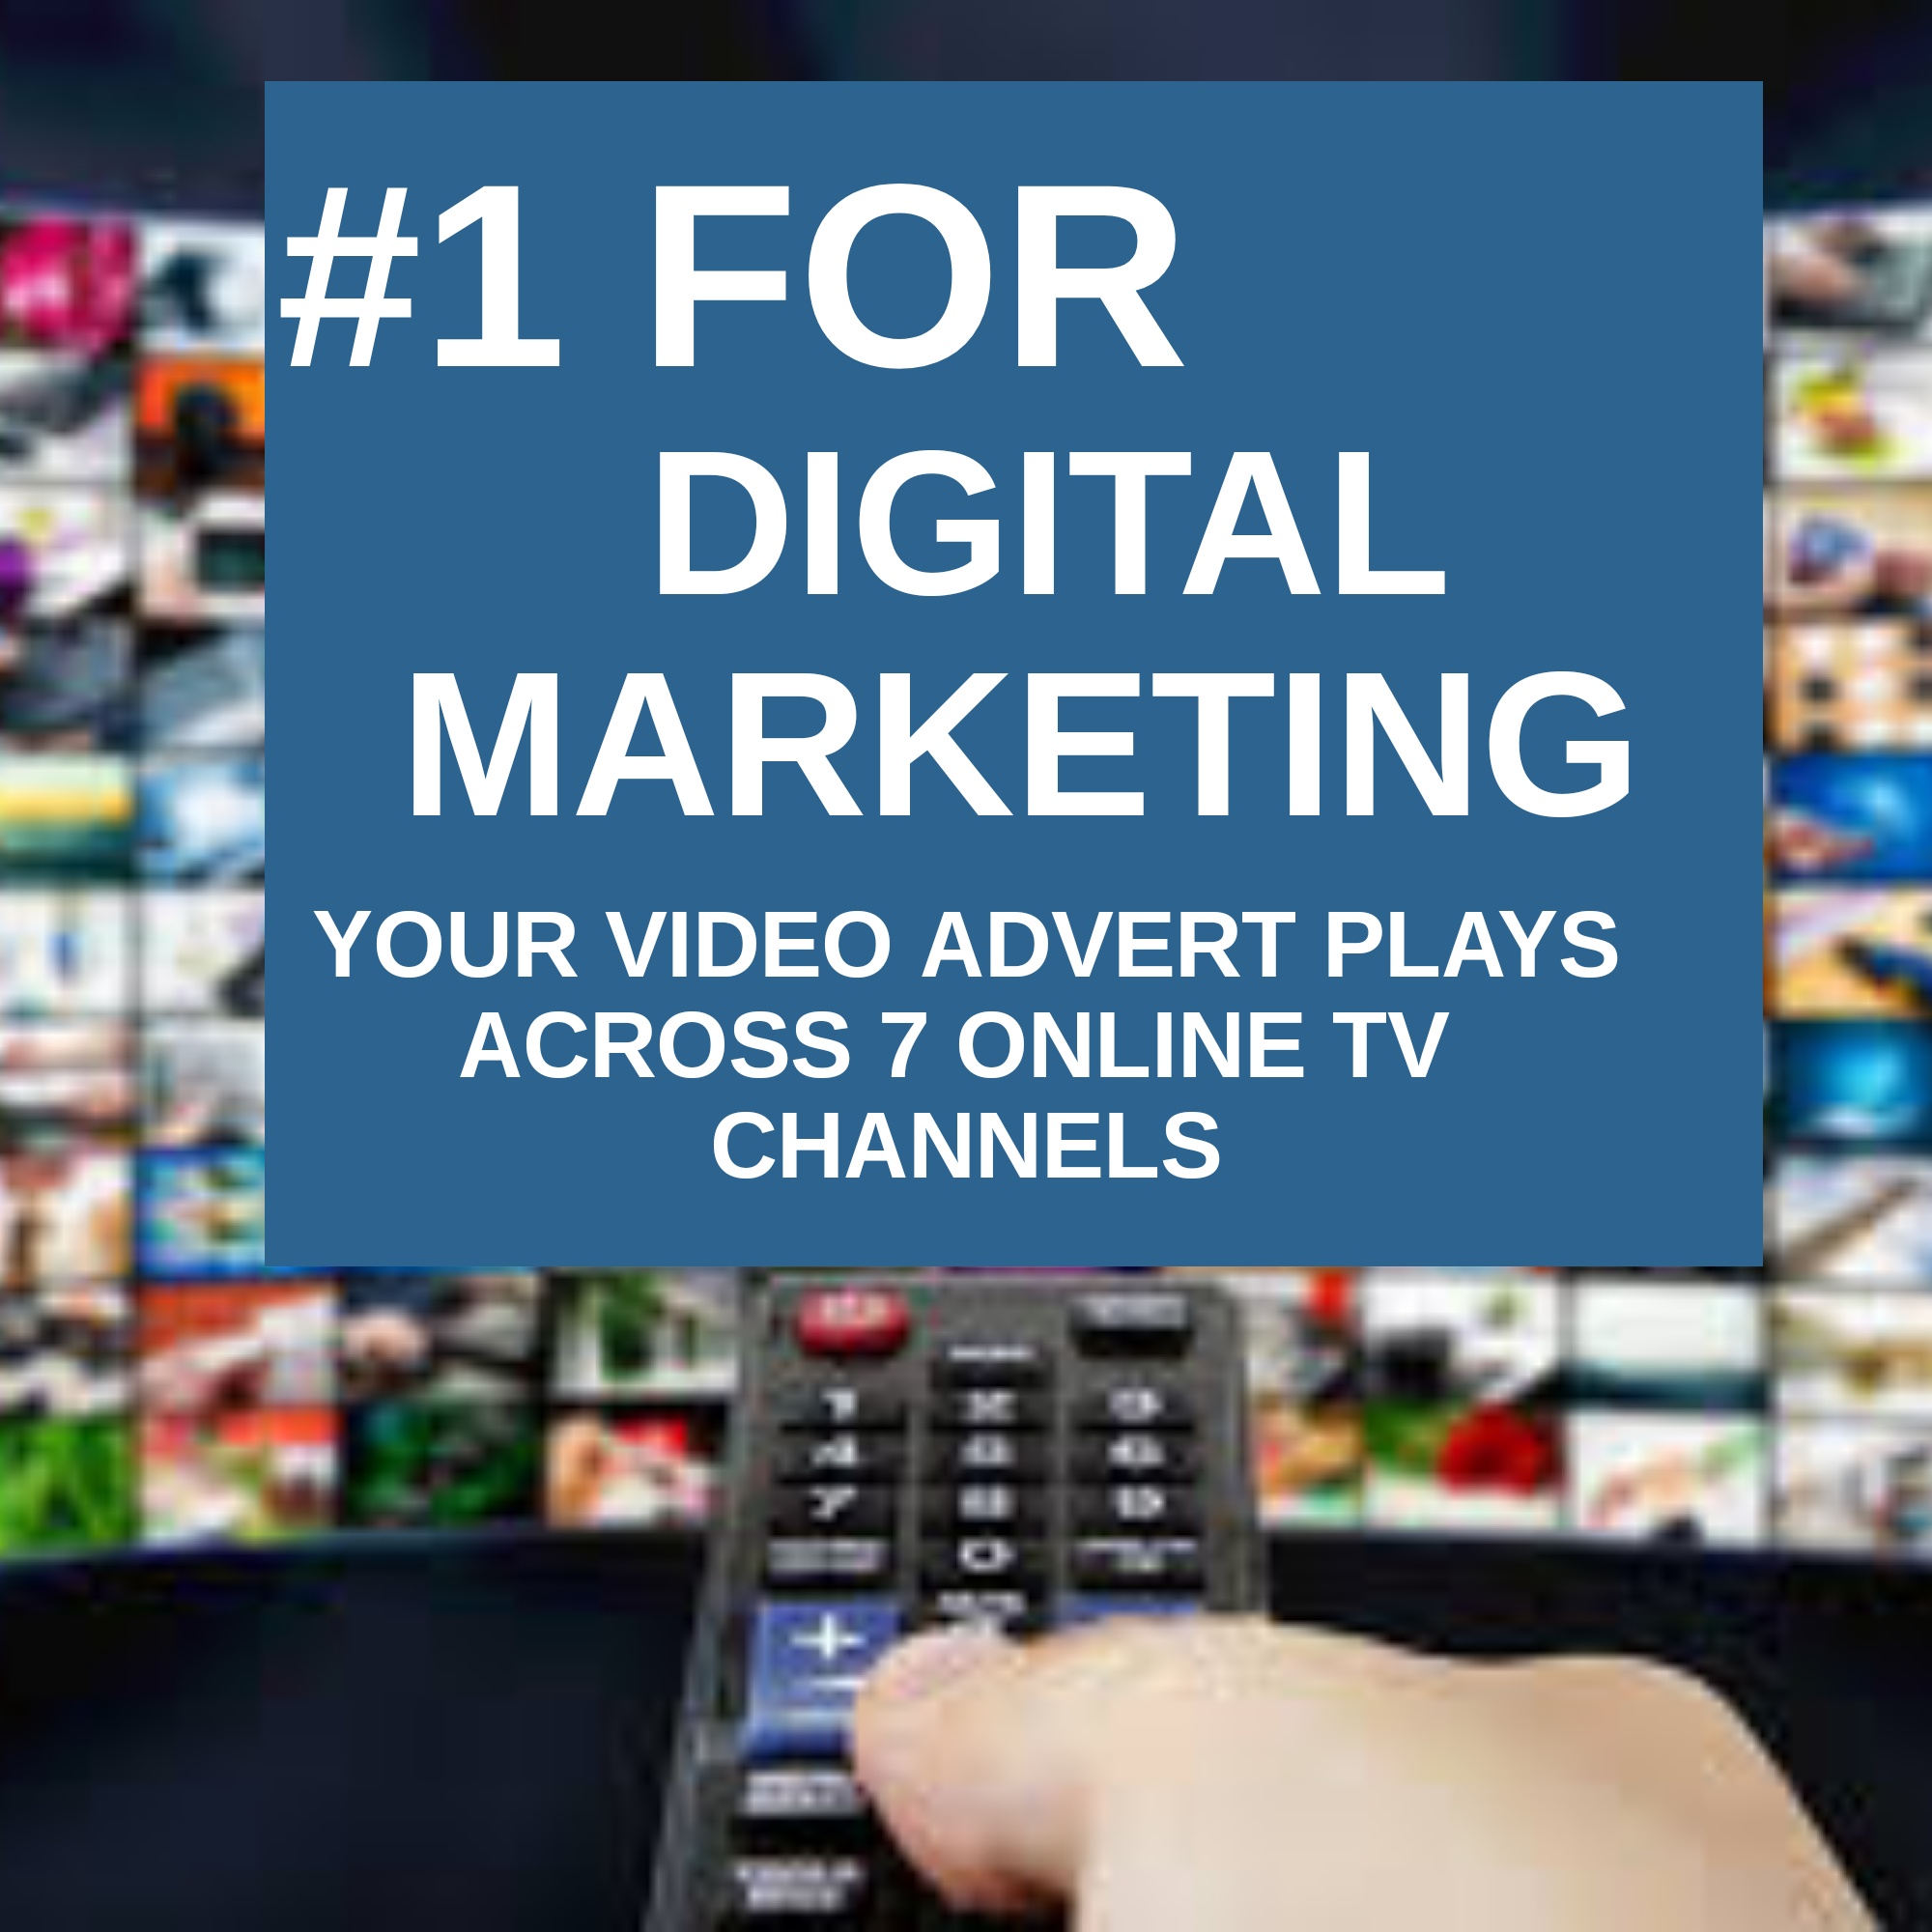 Promote your Advert on 3 online TV channels 300,000 people will view your video or Image Advert while watching.